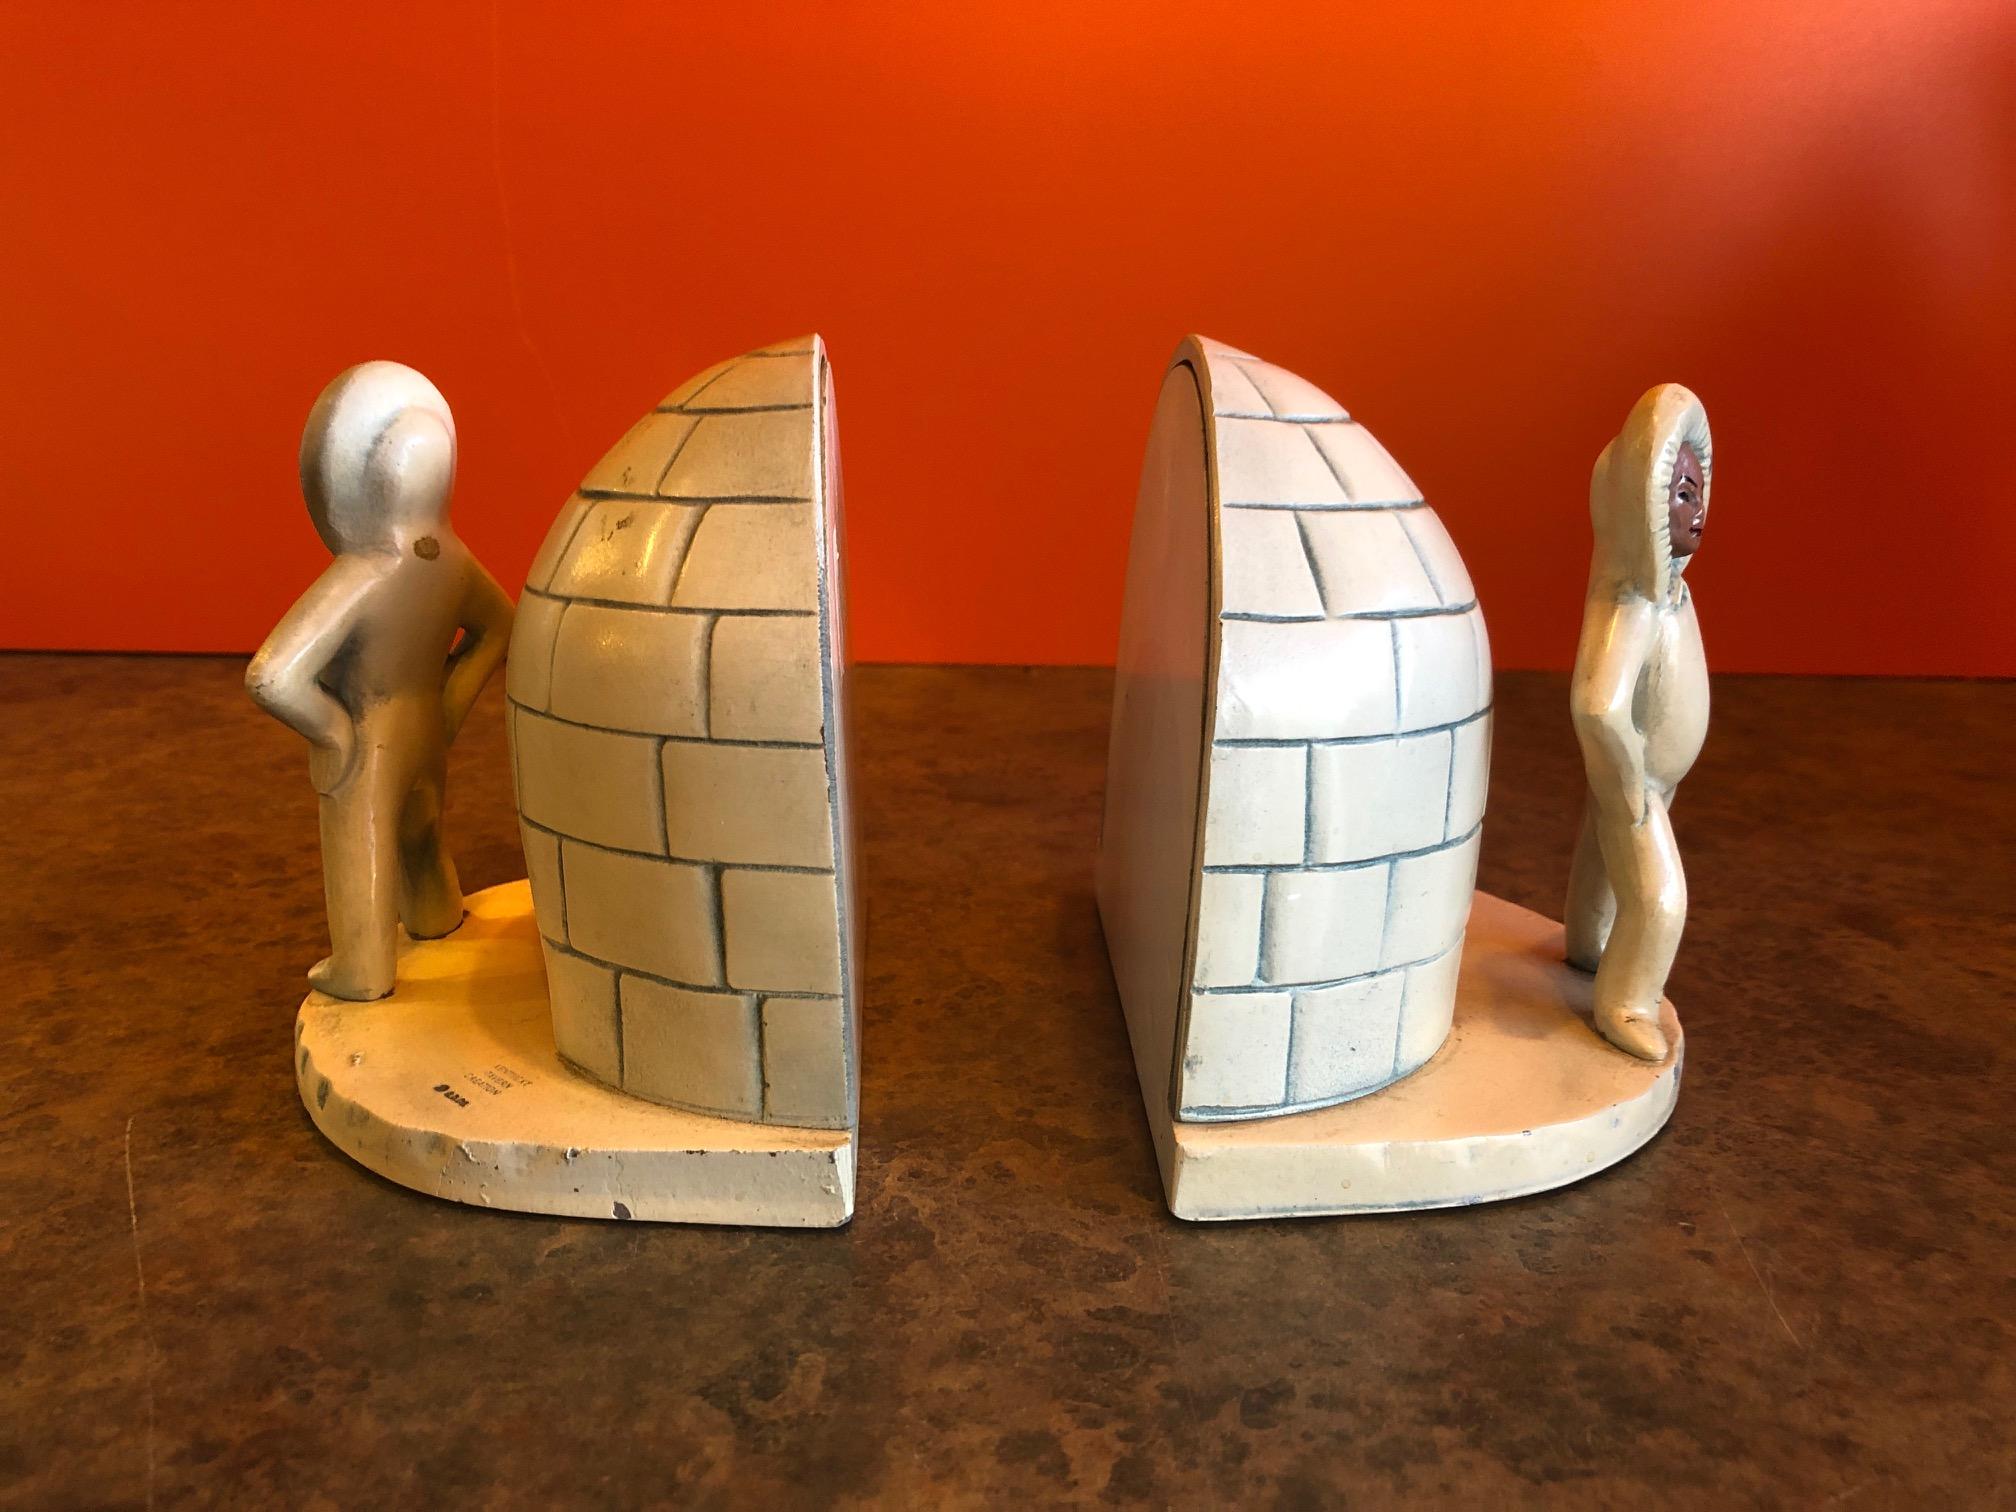 Cast Pair of Aluminum Eskimo / Igloo Bookends by Kentucky Tavern Creations For Sale